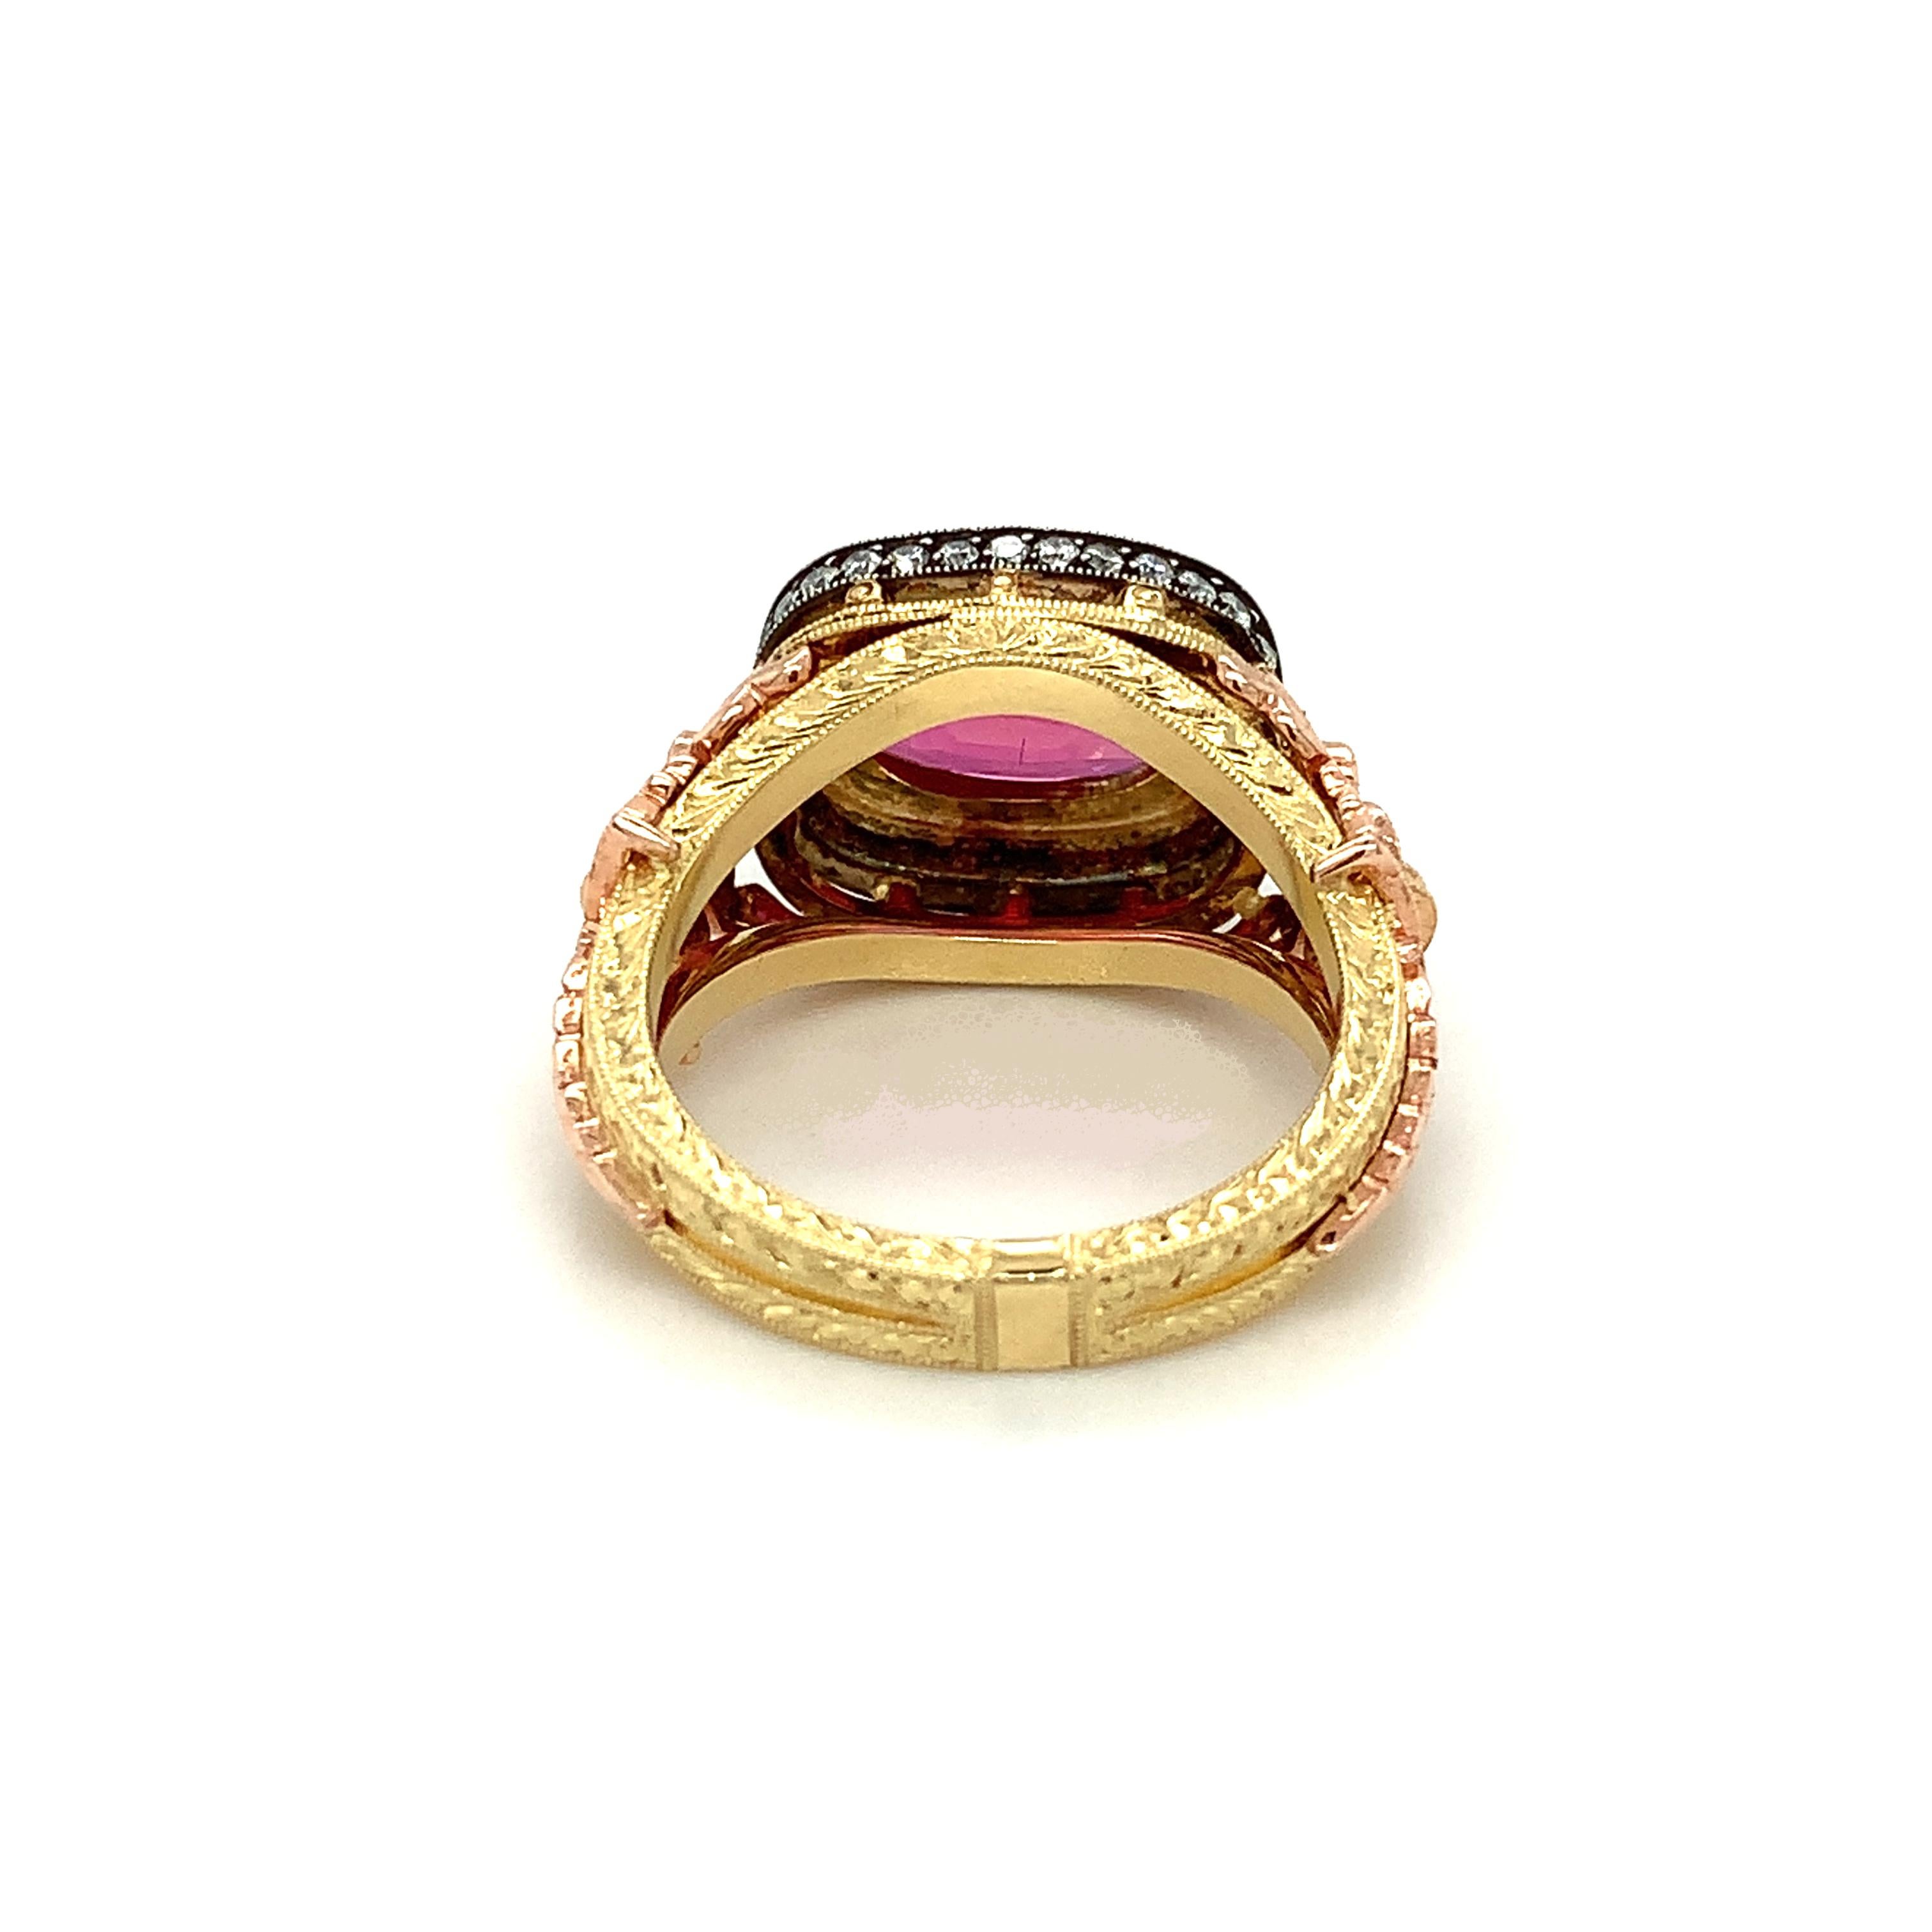 3.29 Carat Pink Sapphire and Diamond Cocktail Ring in 18k Rose and Yellow Gold For Sale 4